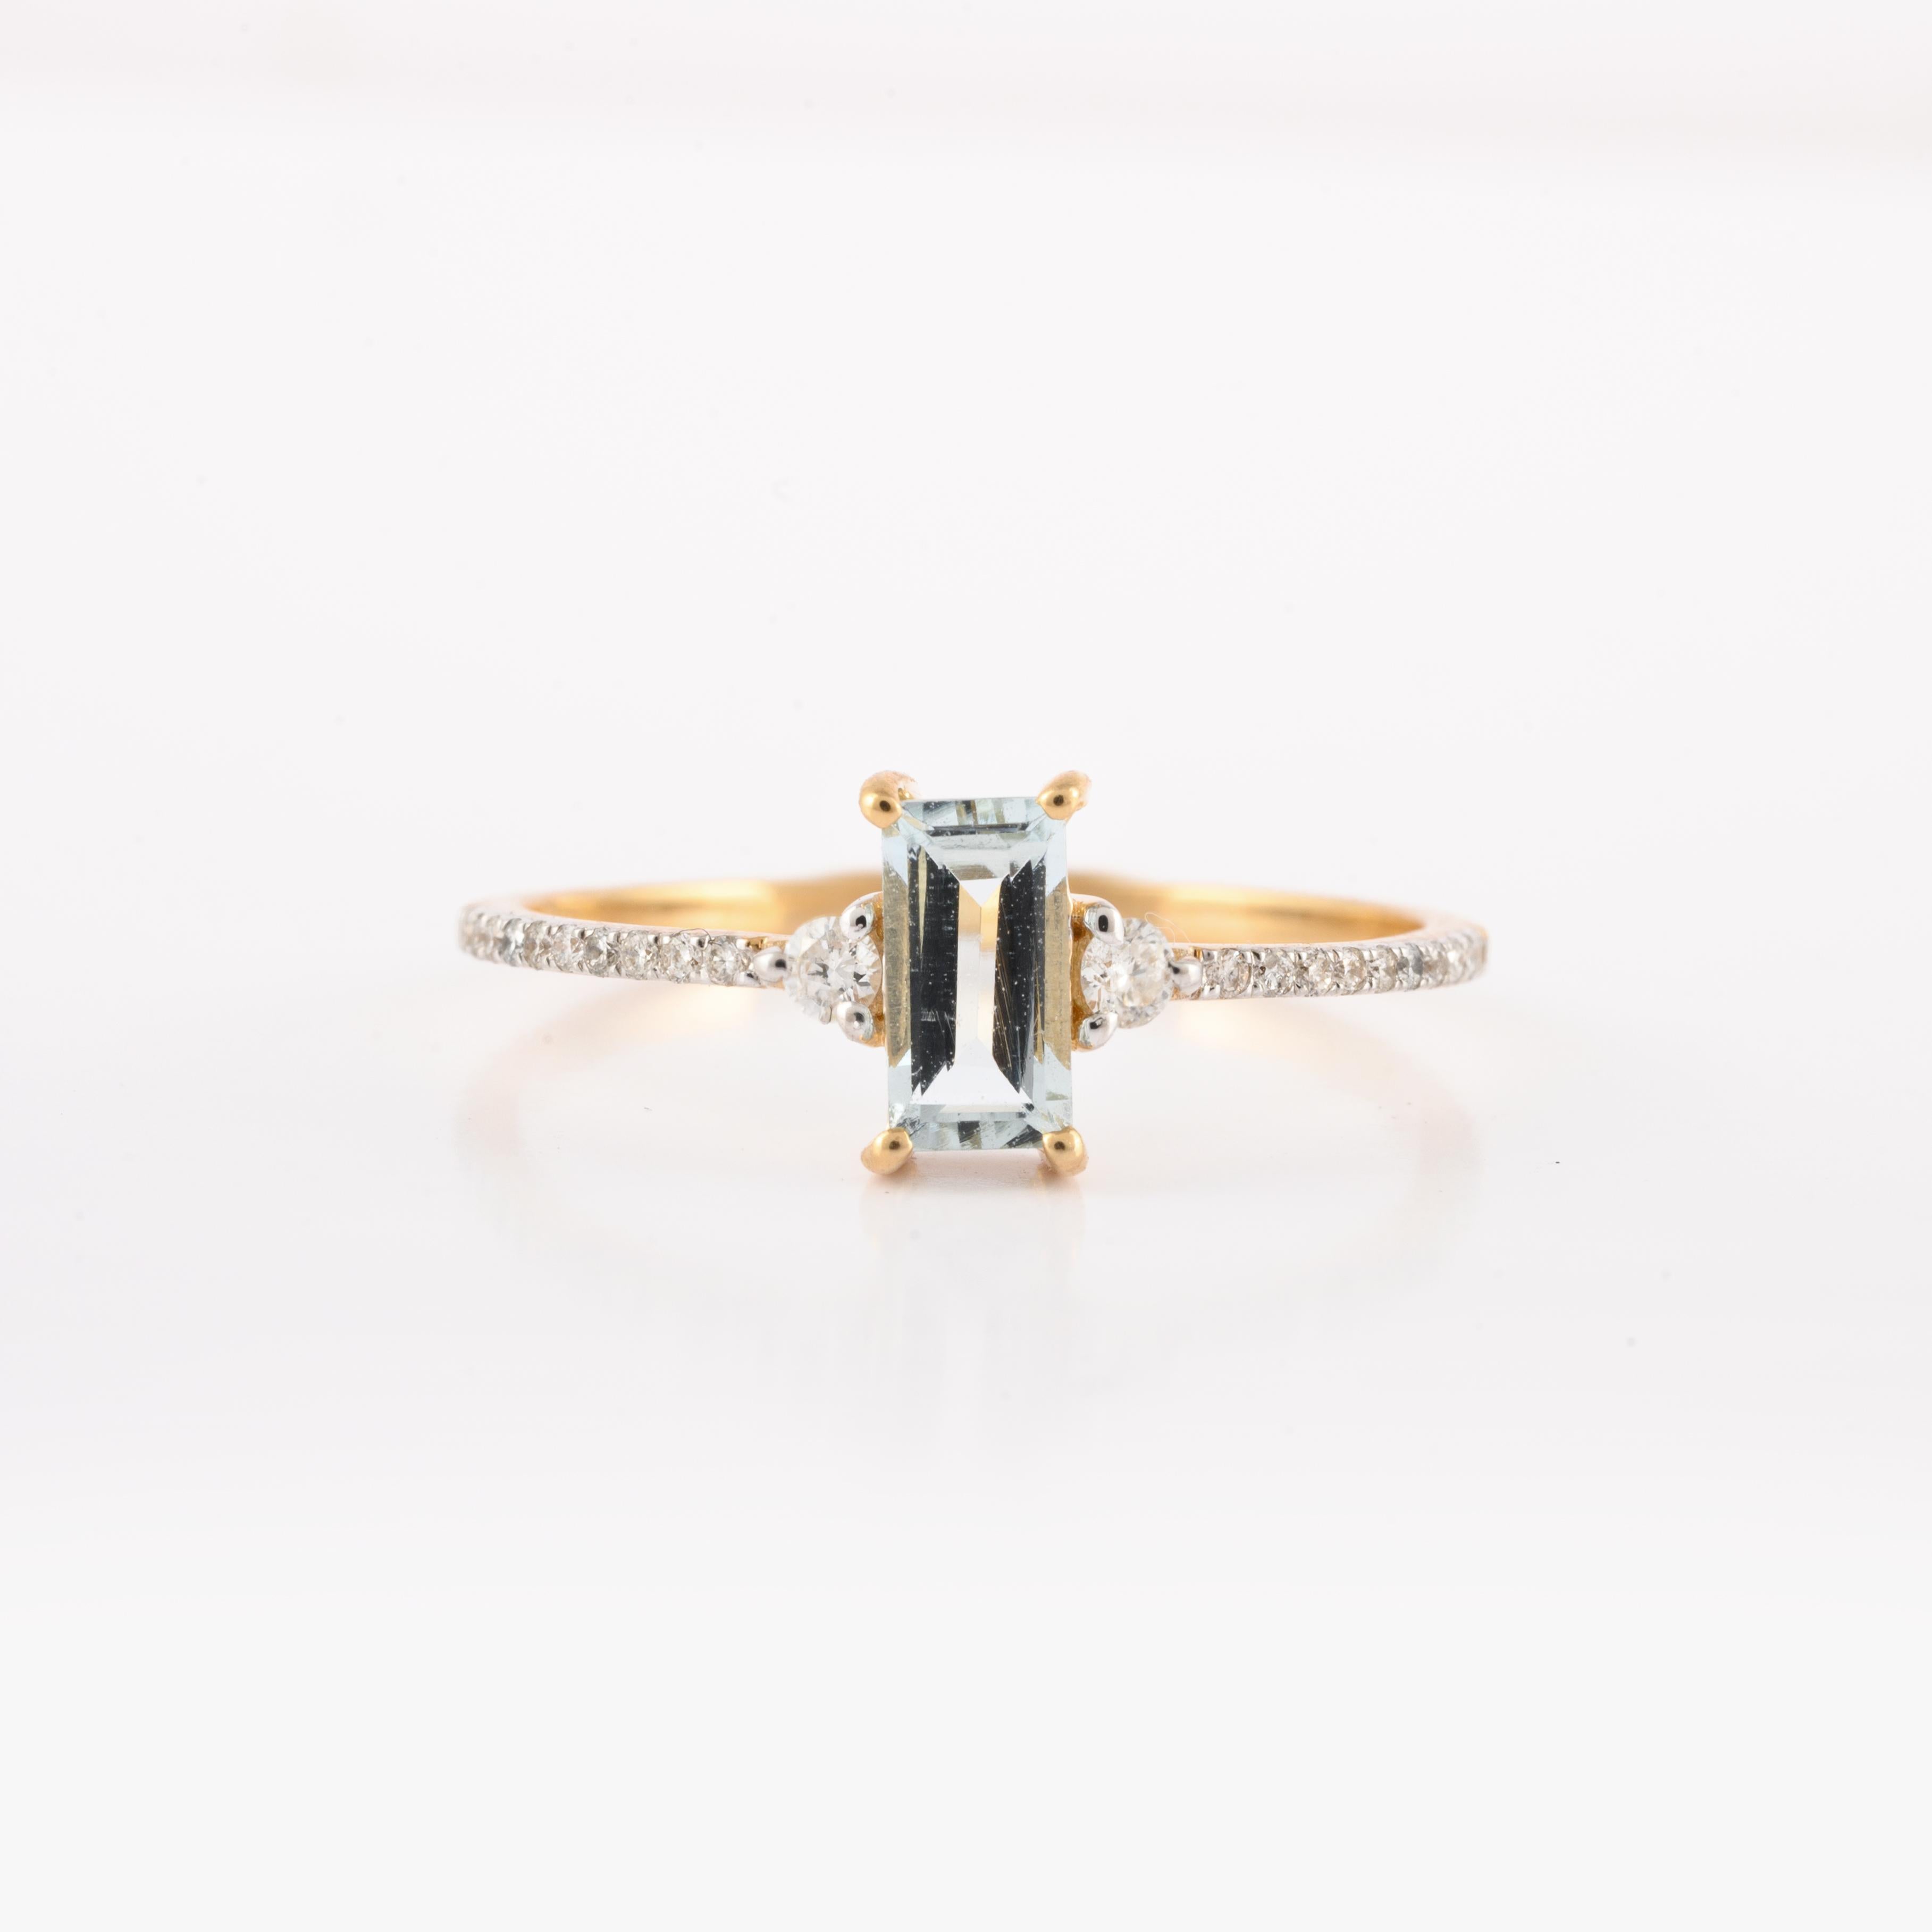 For Sale:  Baguette Cut Aquamarine Ring With Diamonds 18k Solid Yellow Gold 2